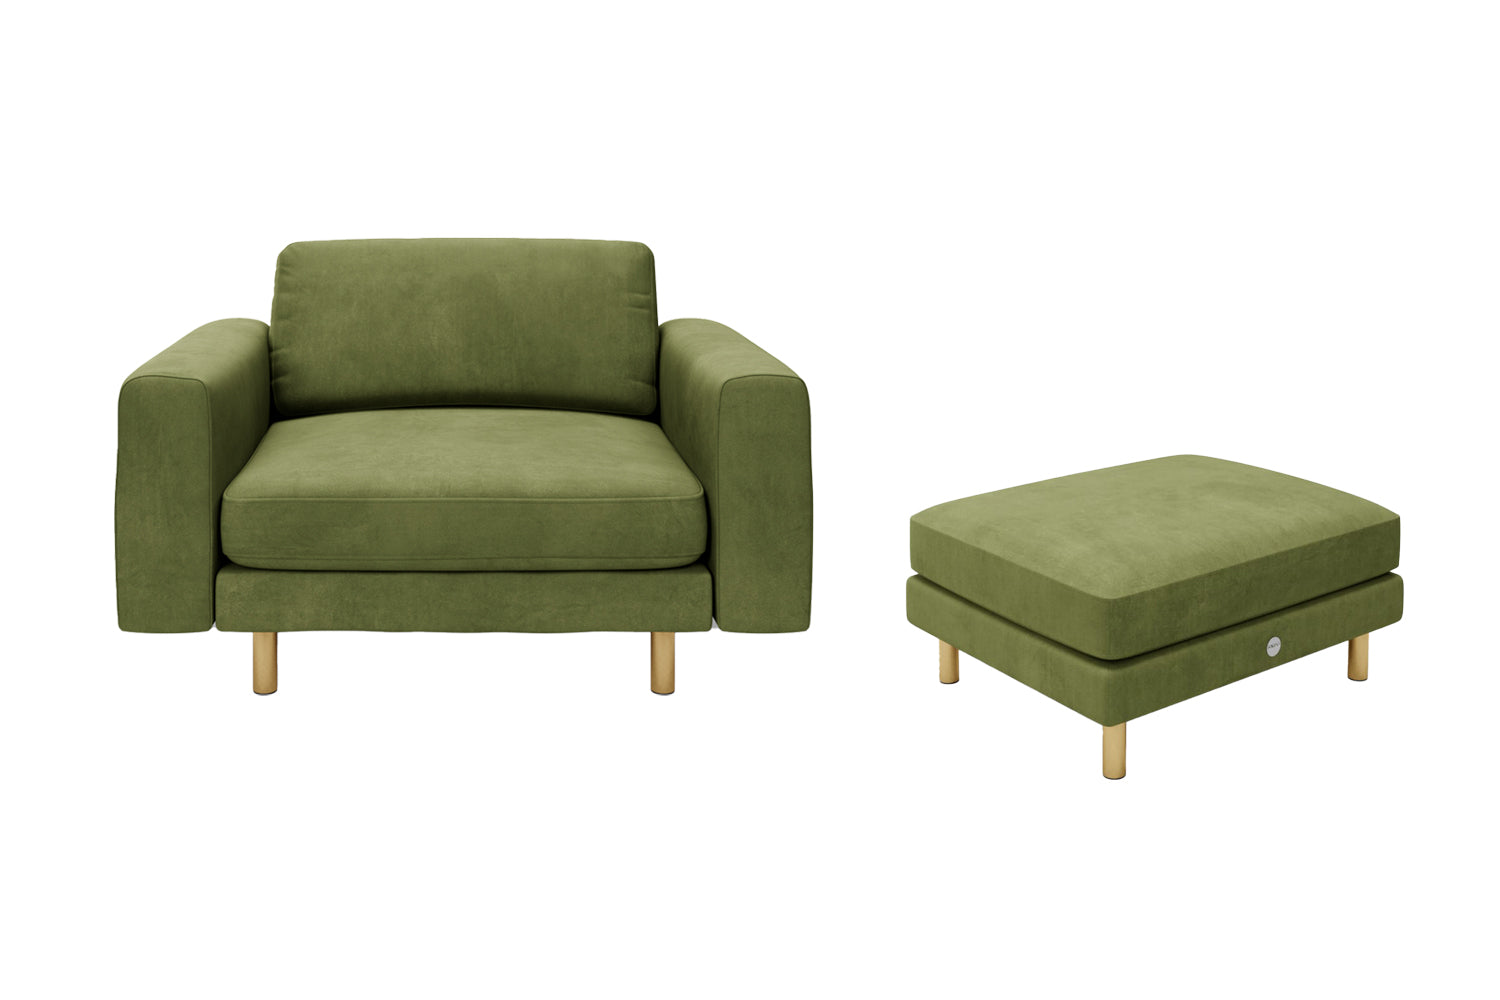 The Big Chill - 1.5 Seater Snuggler and Footstool Set - Olive